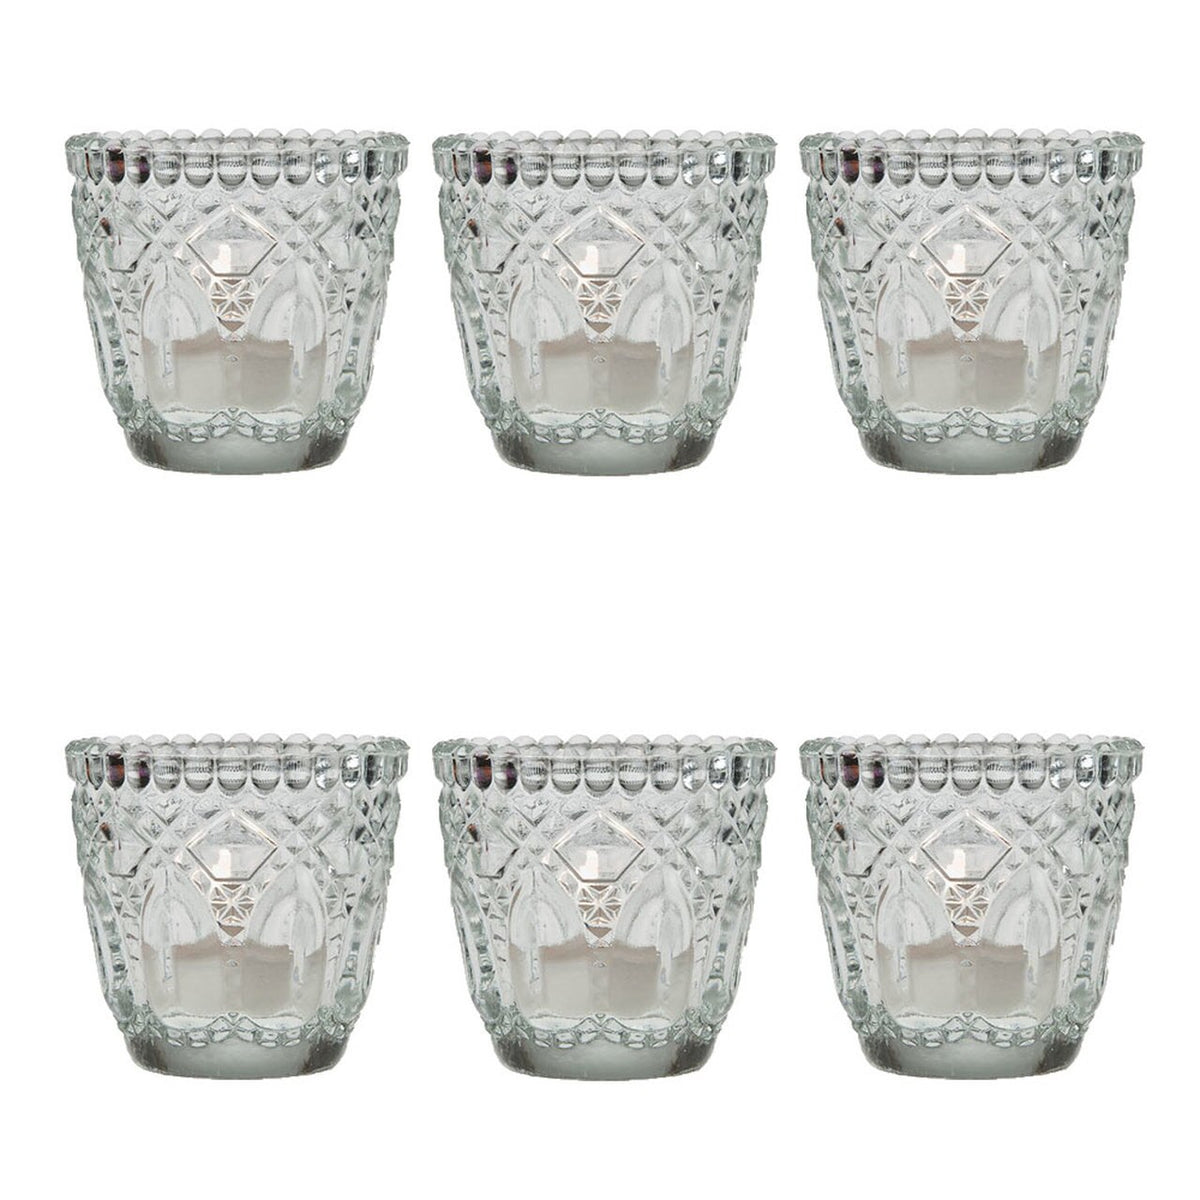 6 Pack | Faceted Vintage Glass Candle Holders (2.75-Inch, Lillian Design, Clear) - Use with Tea Lights - For Home Decor, Parties and Wedding Decorations - PaperLanternStore.com - Paper Lanterns, Decor, Party Lights &amp; More